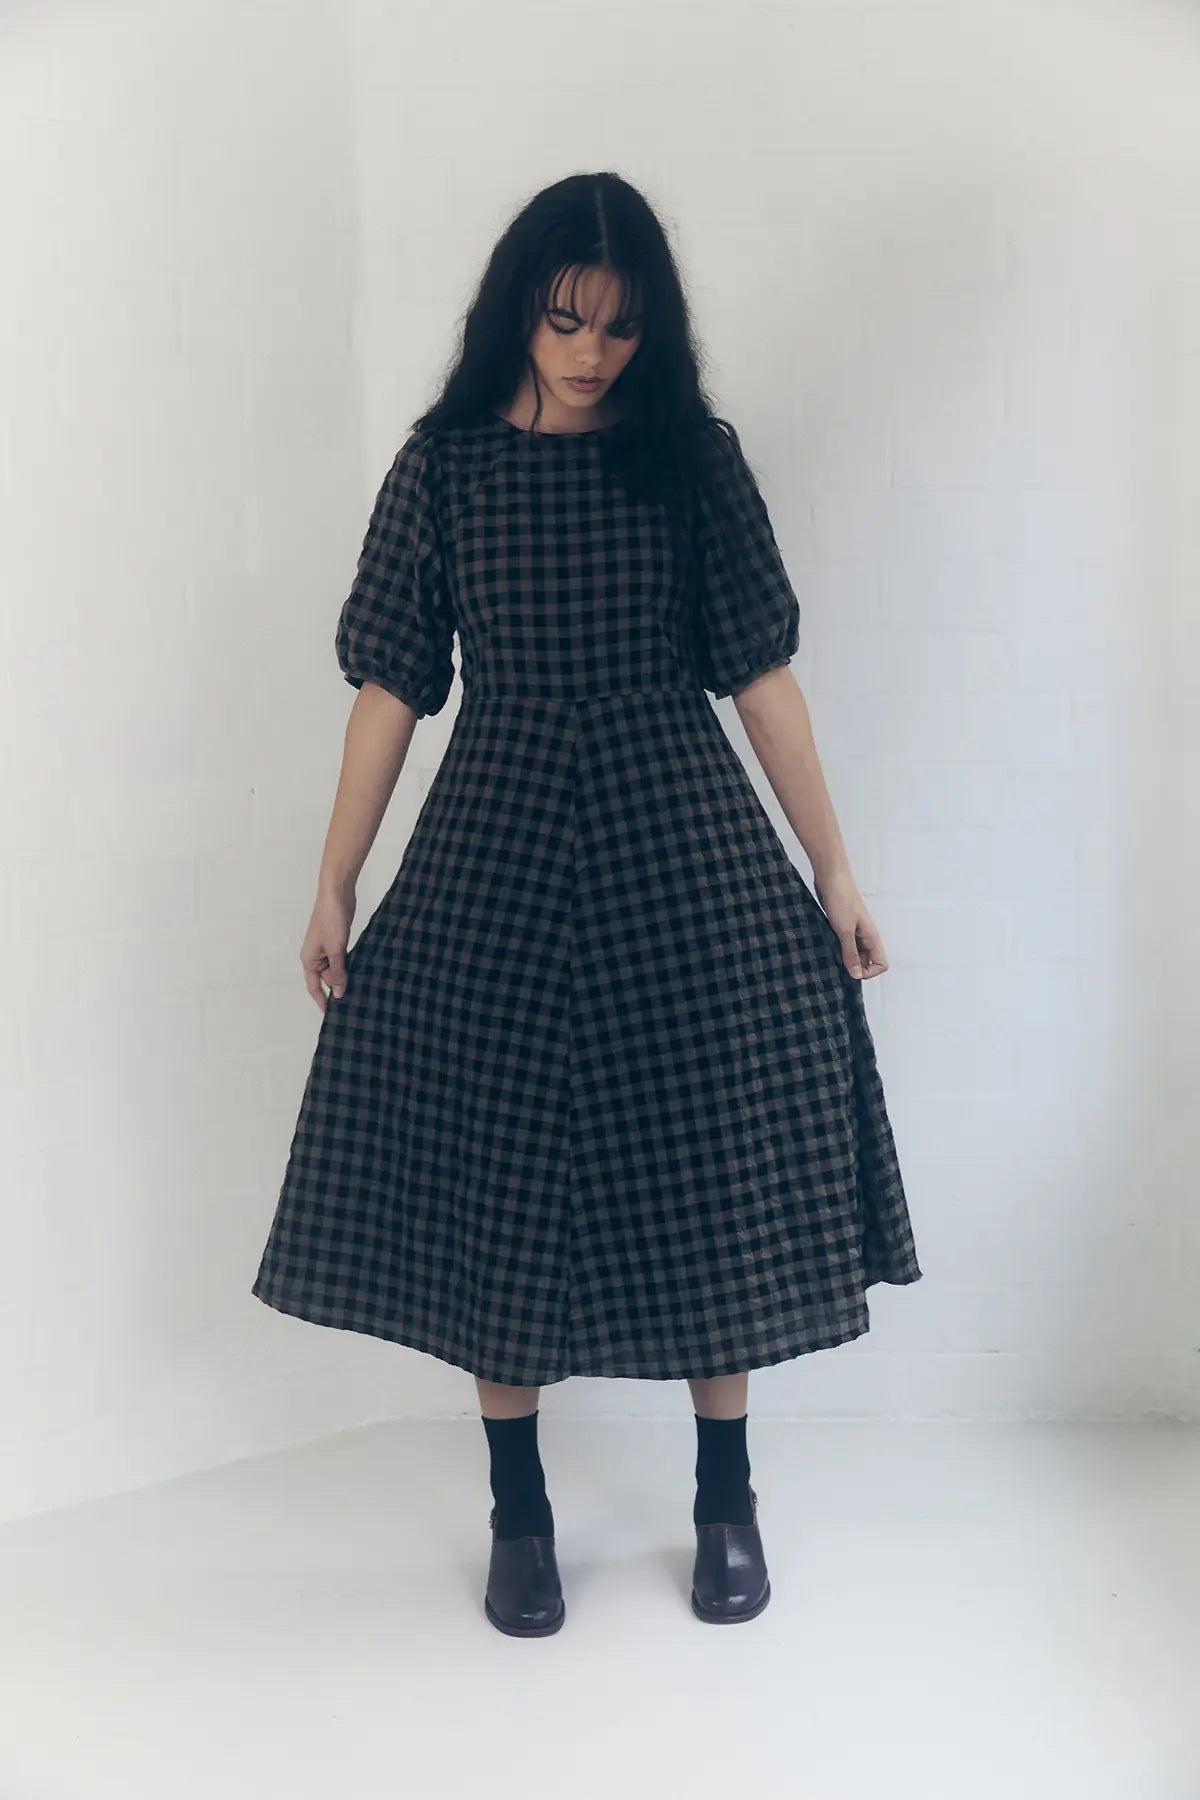 model standing head down front view in a line gingham dress colour mocha and black